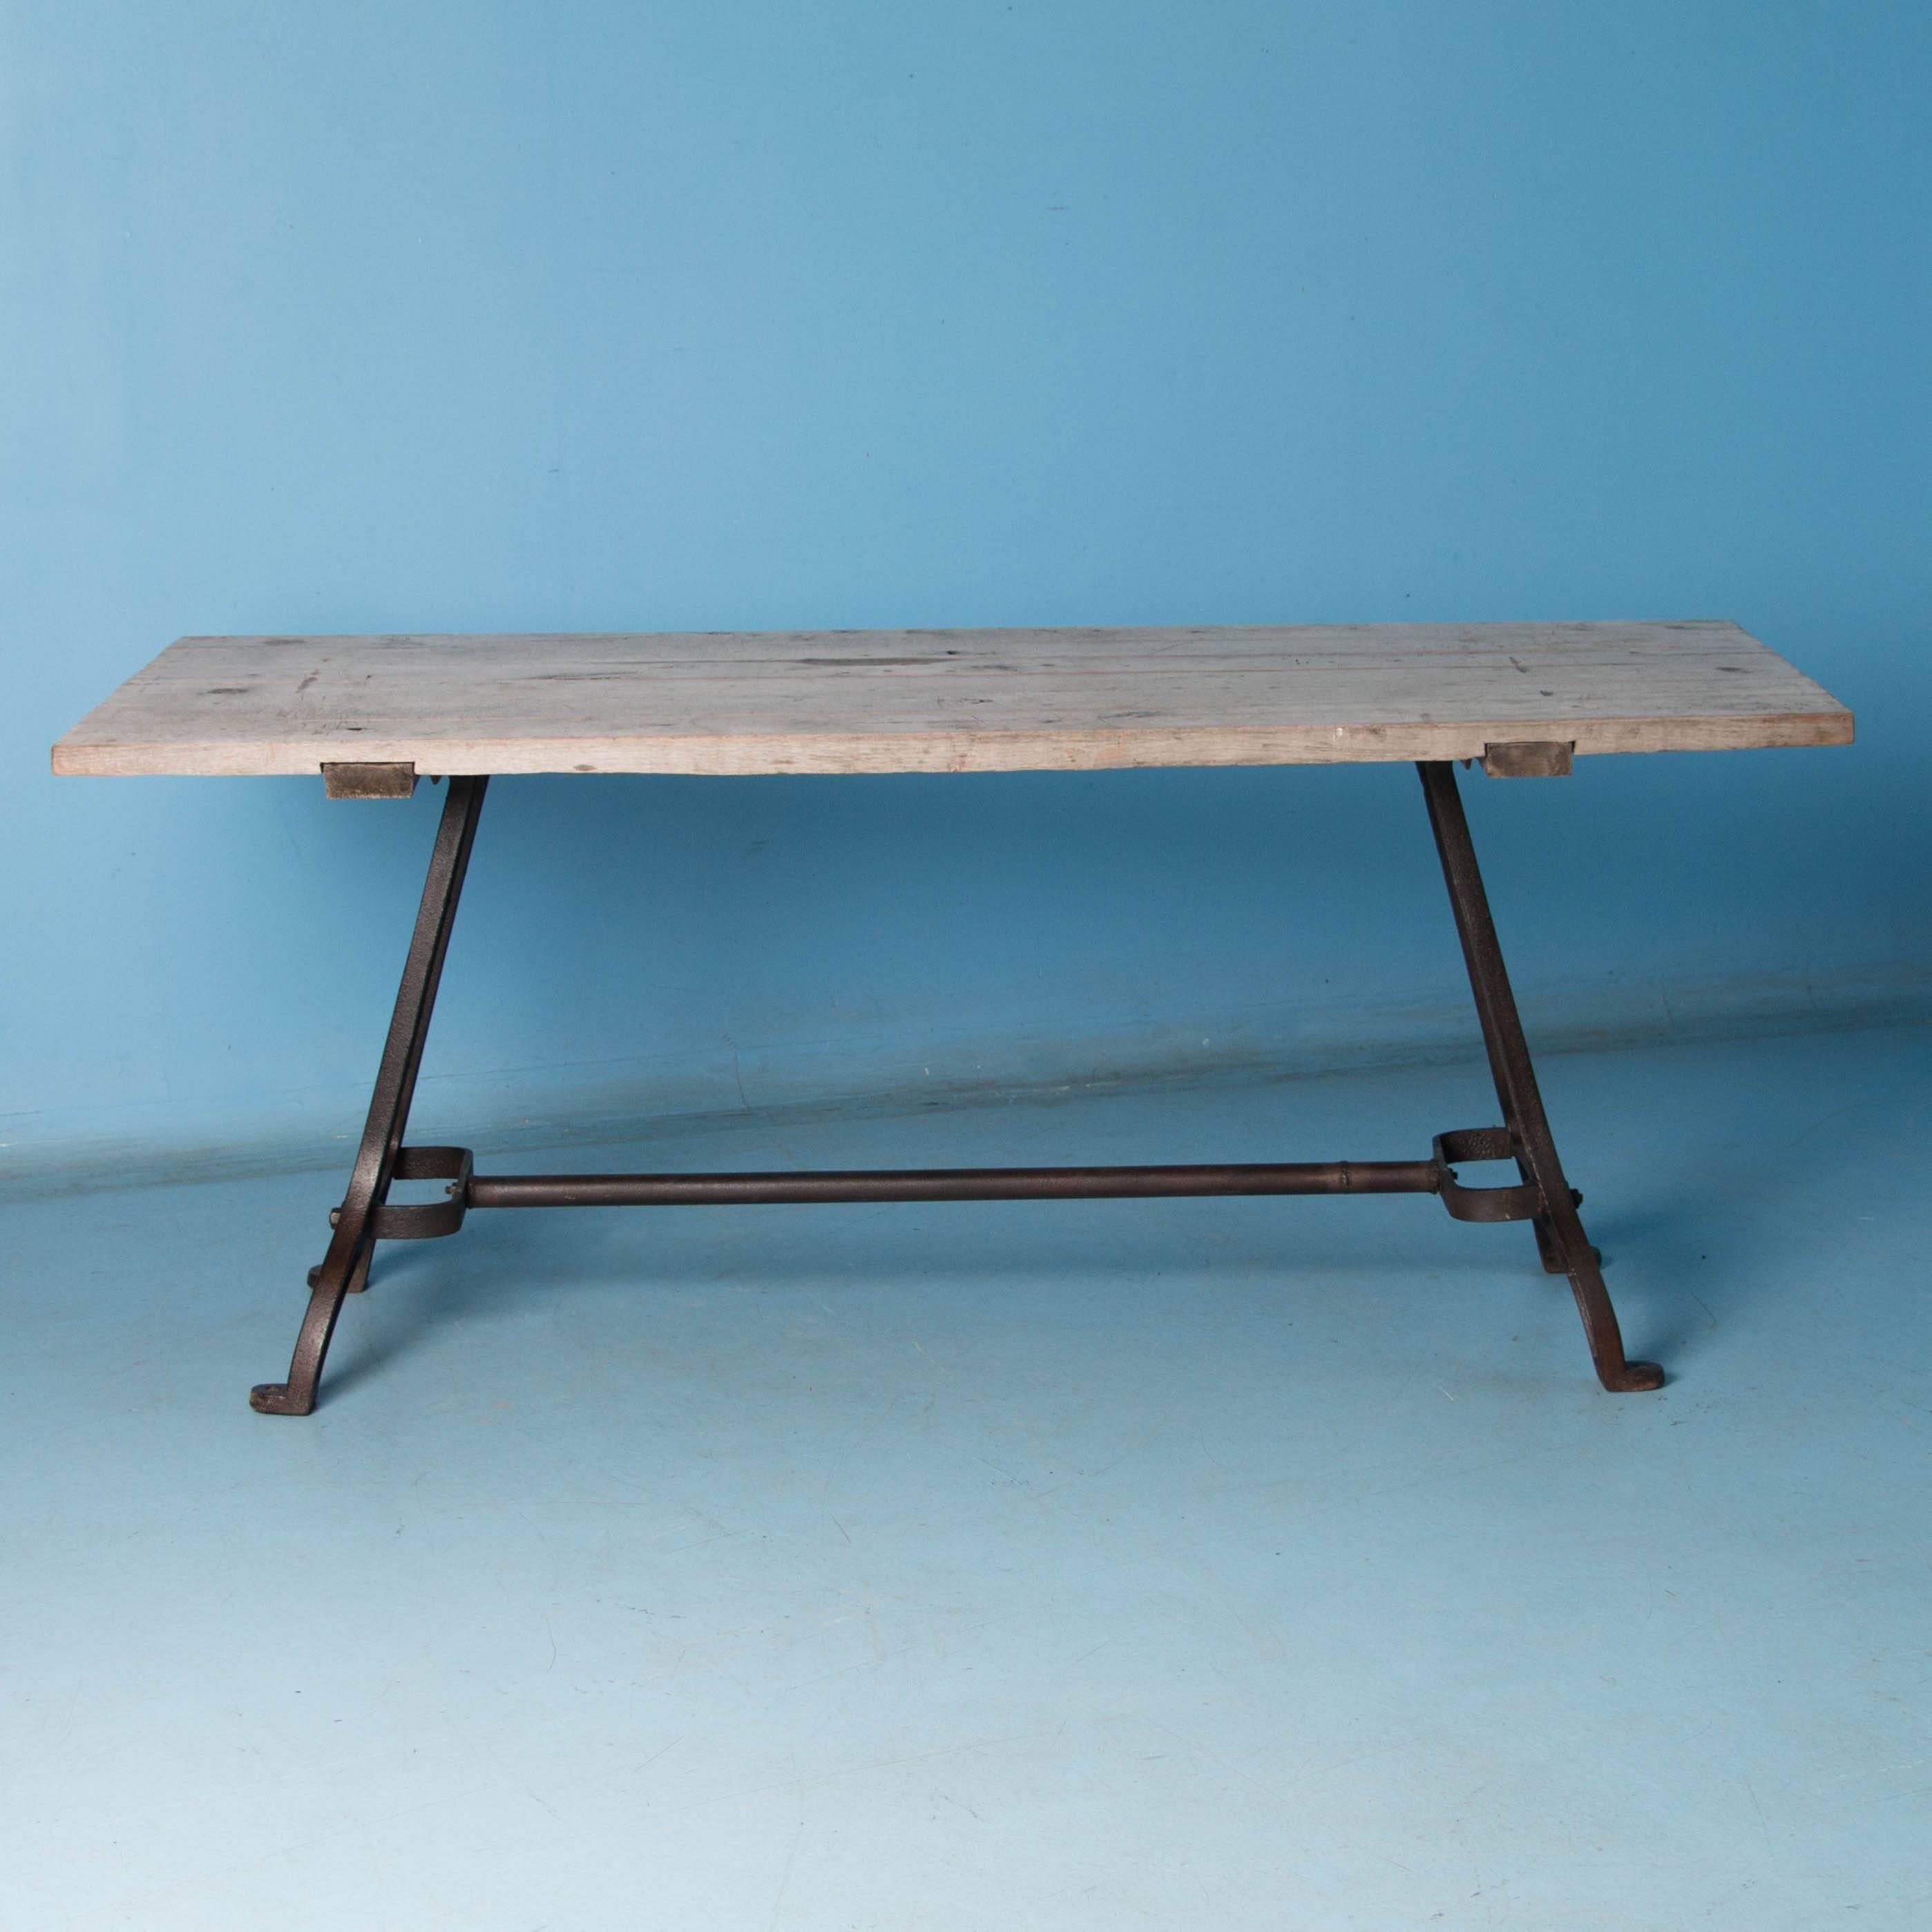 This eastern European dining table with rustic industrial charm, features antique cast iron legs and a hardwood plank top. The distressed silver painted top has the patina of weathered gray wood while the base is a dark gray, almost black, waxed